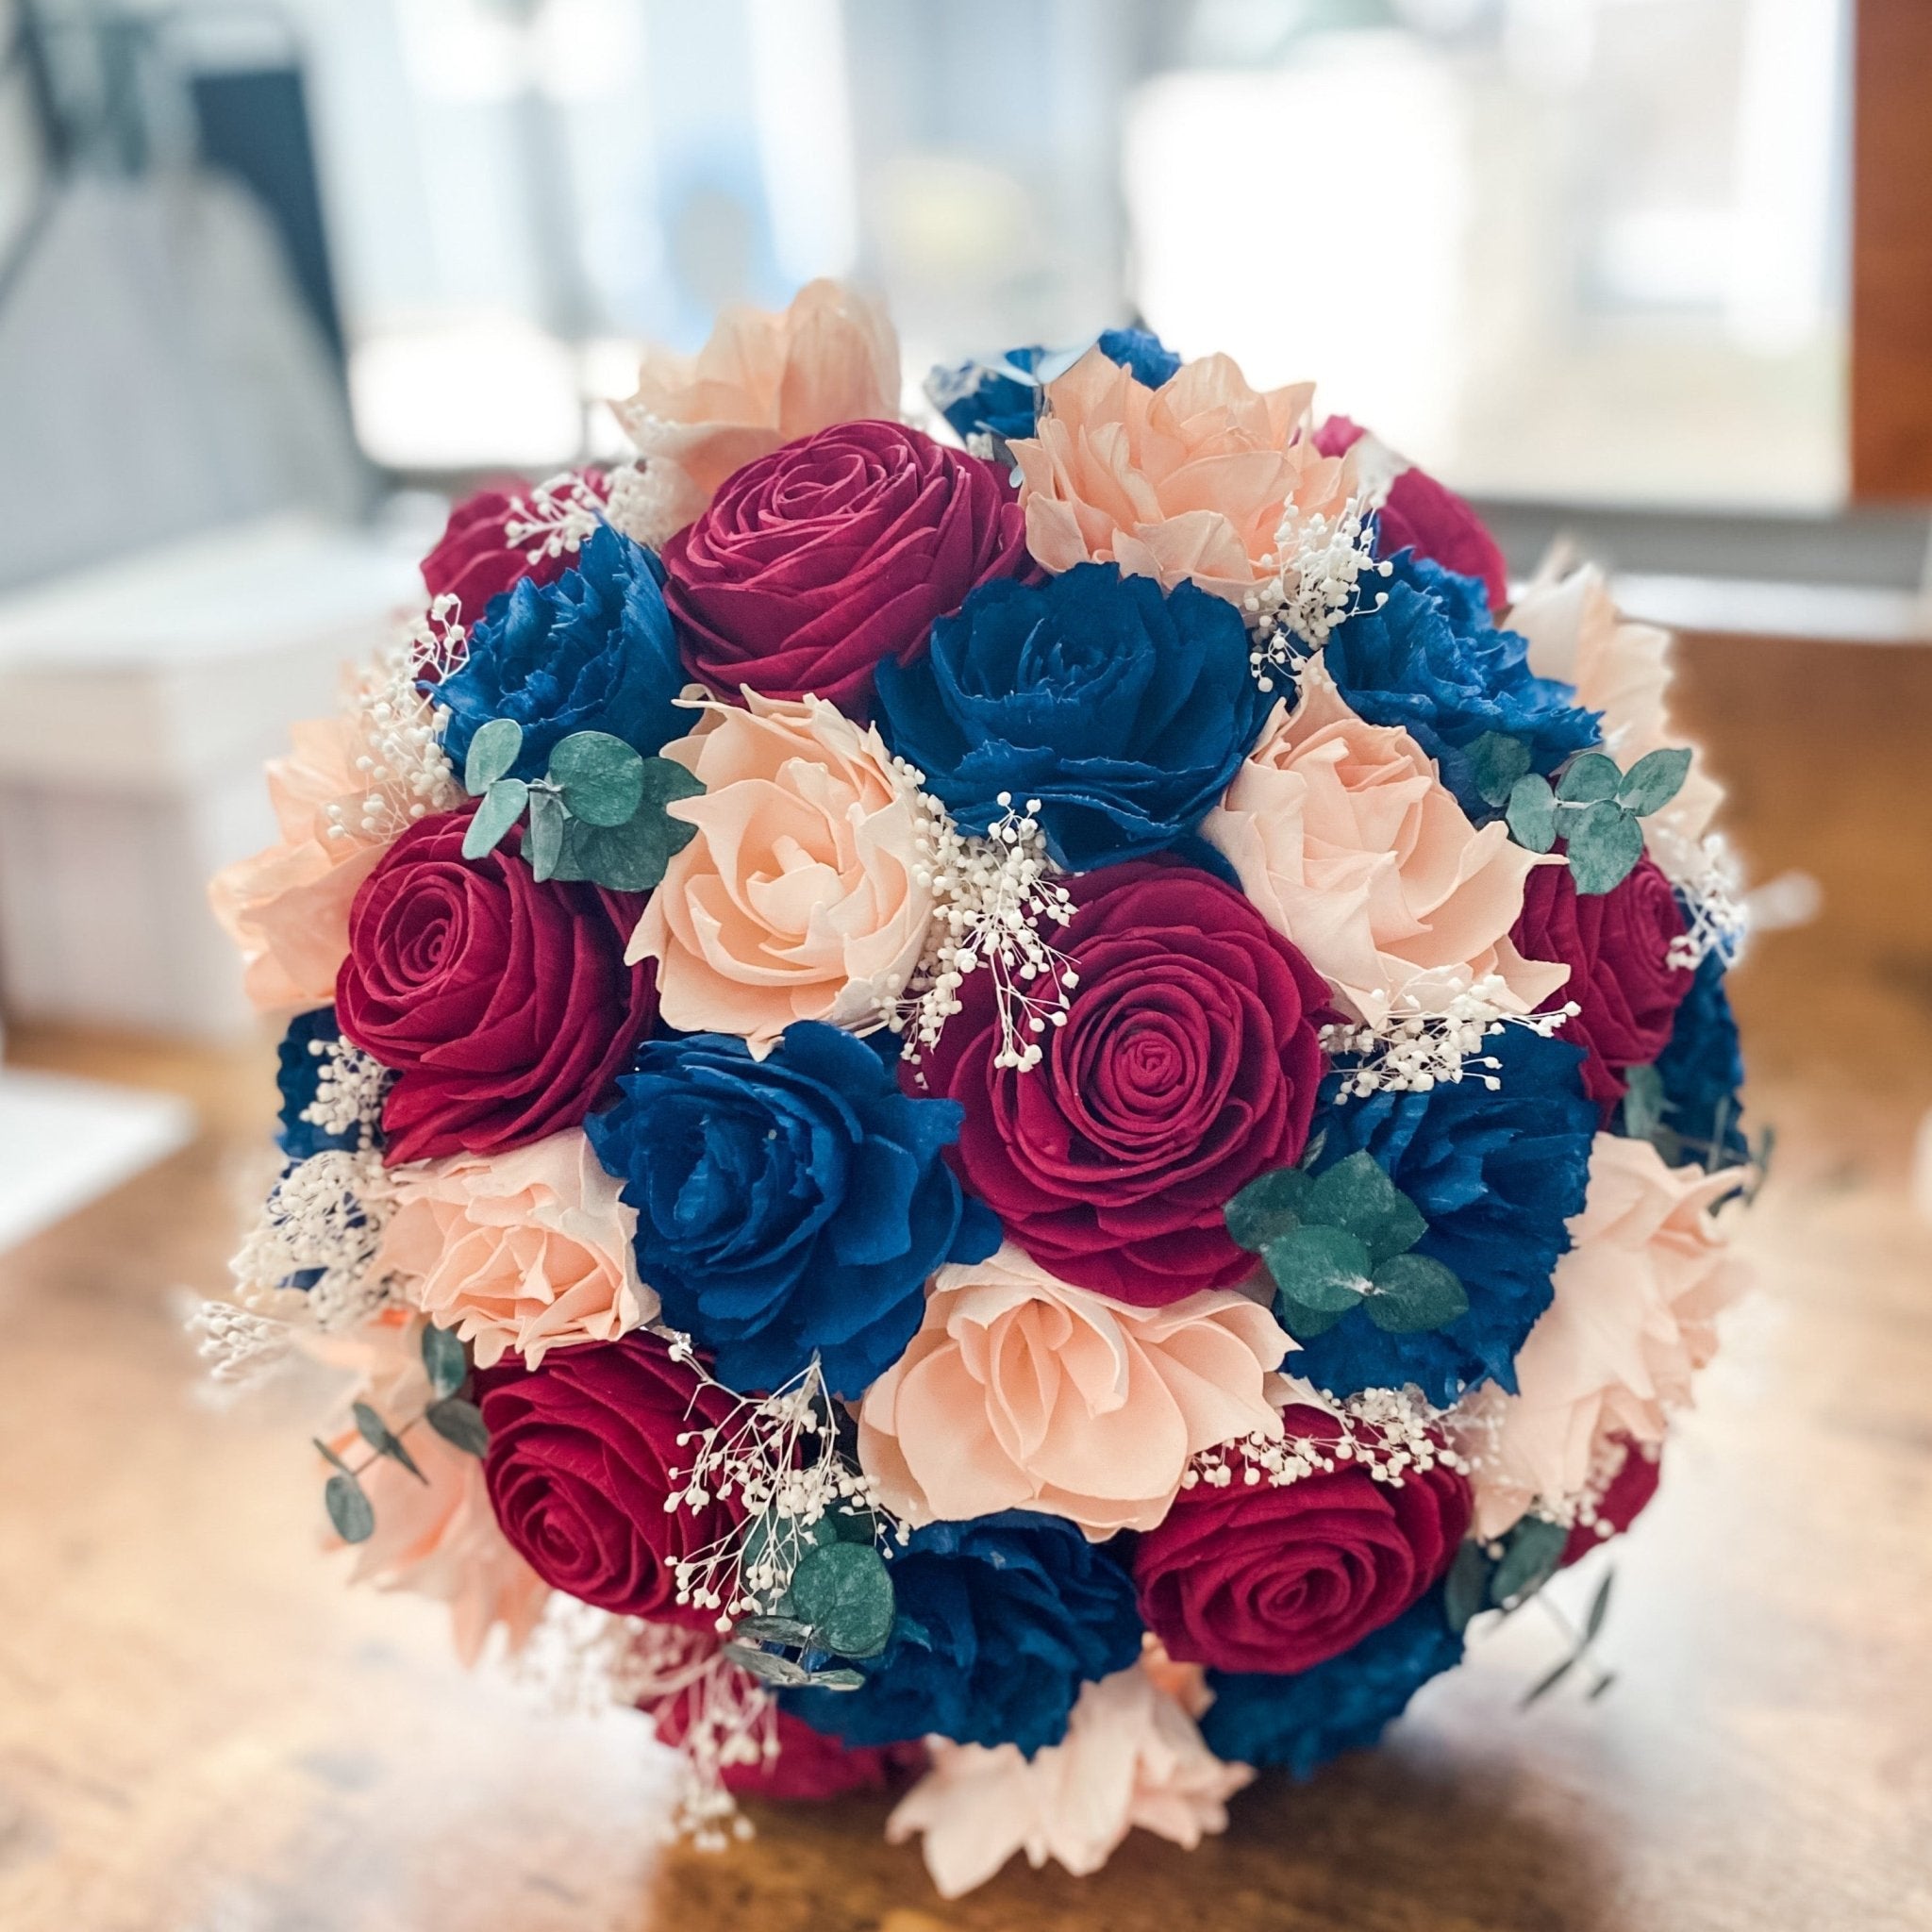 Blissful Union, A Bouquet of Navy Blue and Pink Roses For the Bride&#39;s Special Day - PapiroExtra Large 12&quot; Bride